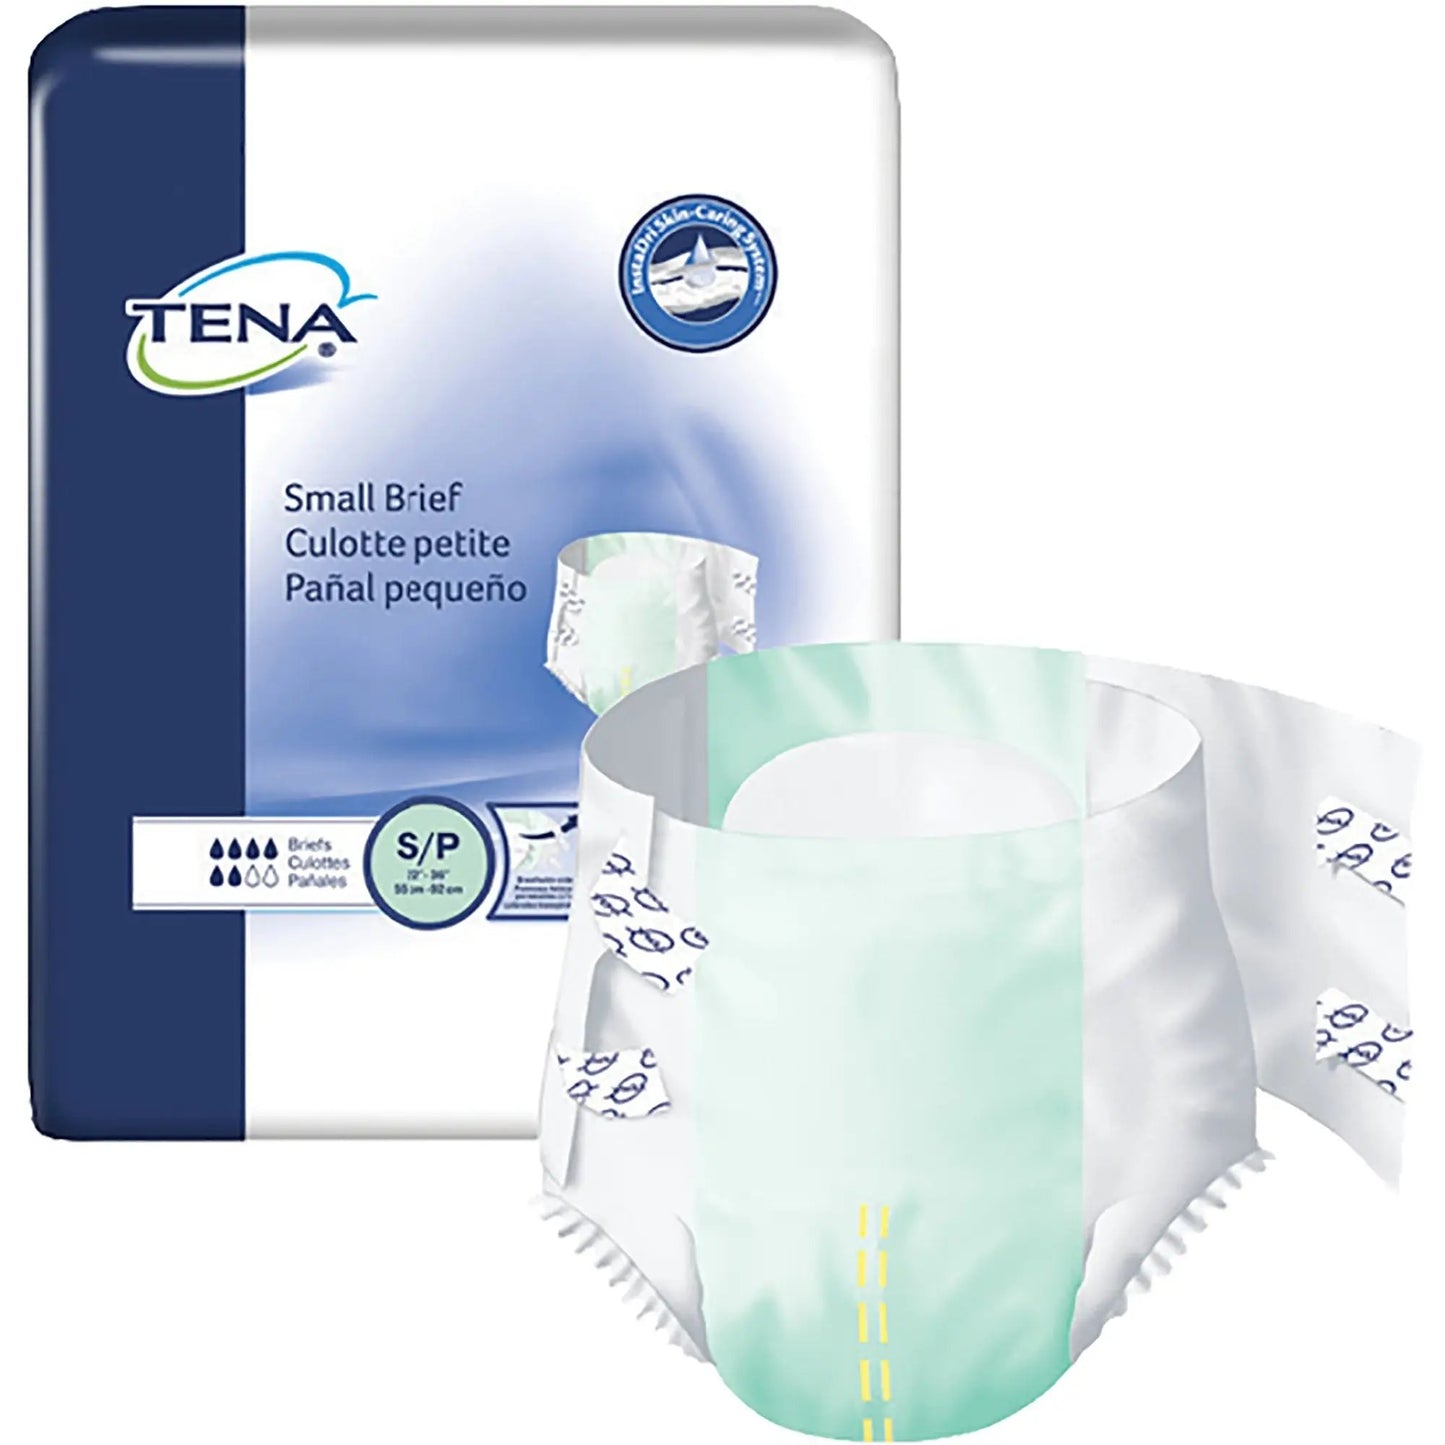 TENA Adult Incontinence Small Brief, Moderate Absorbency